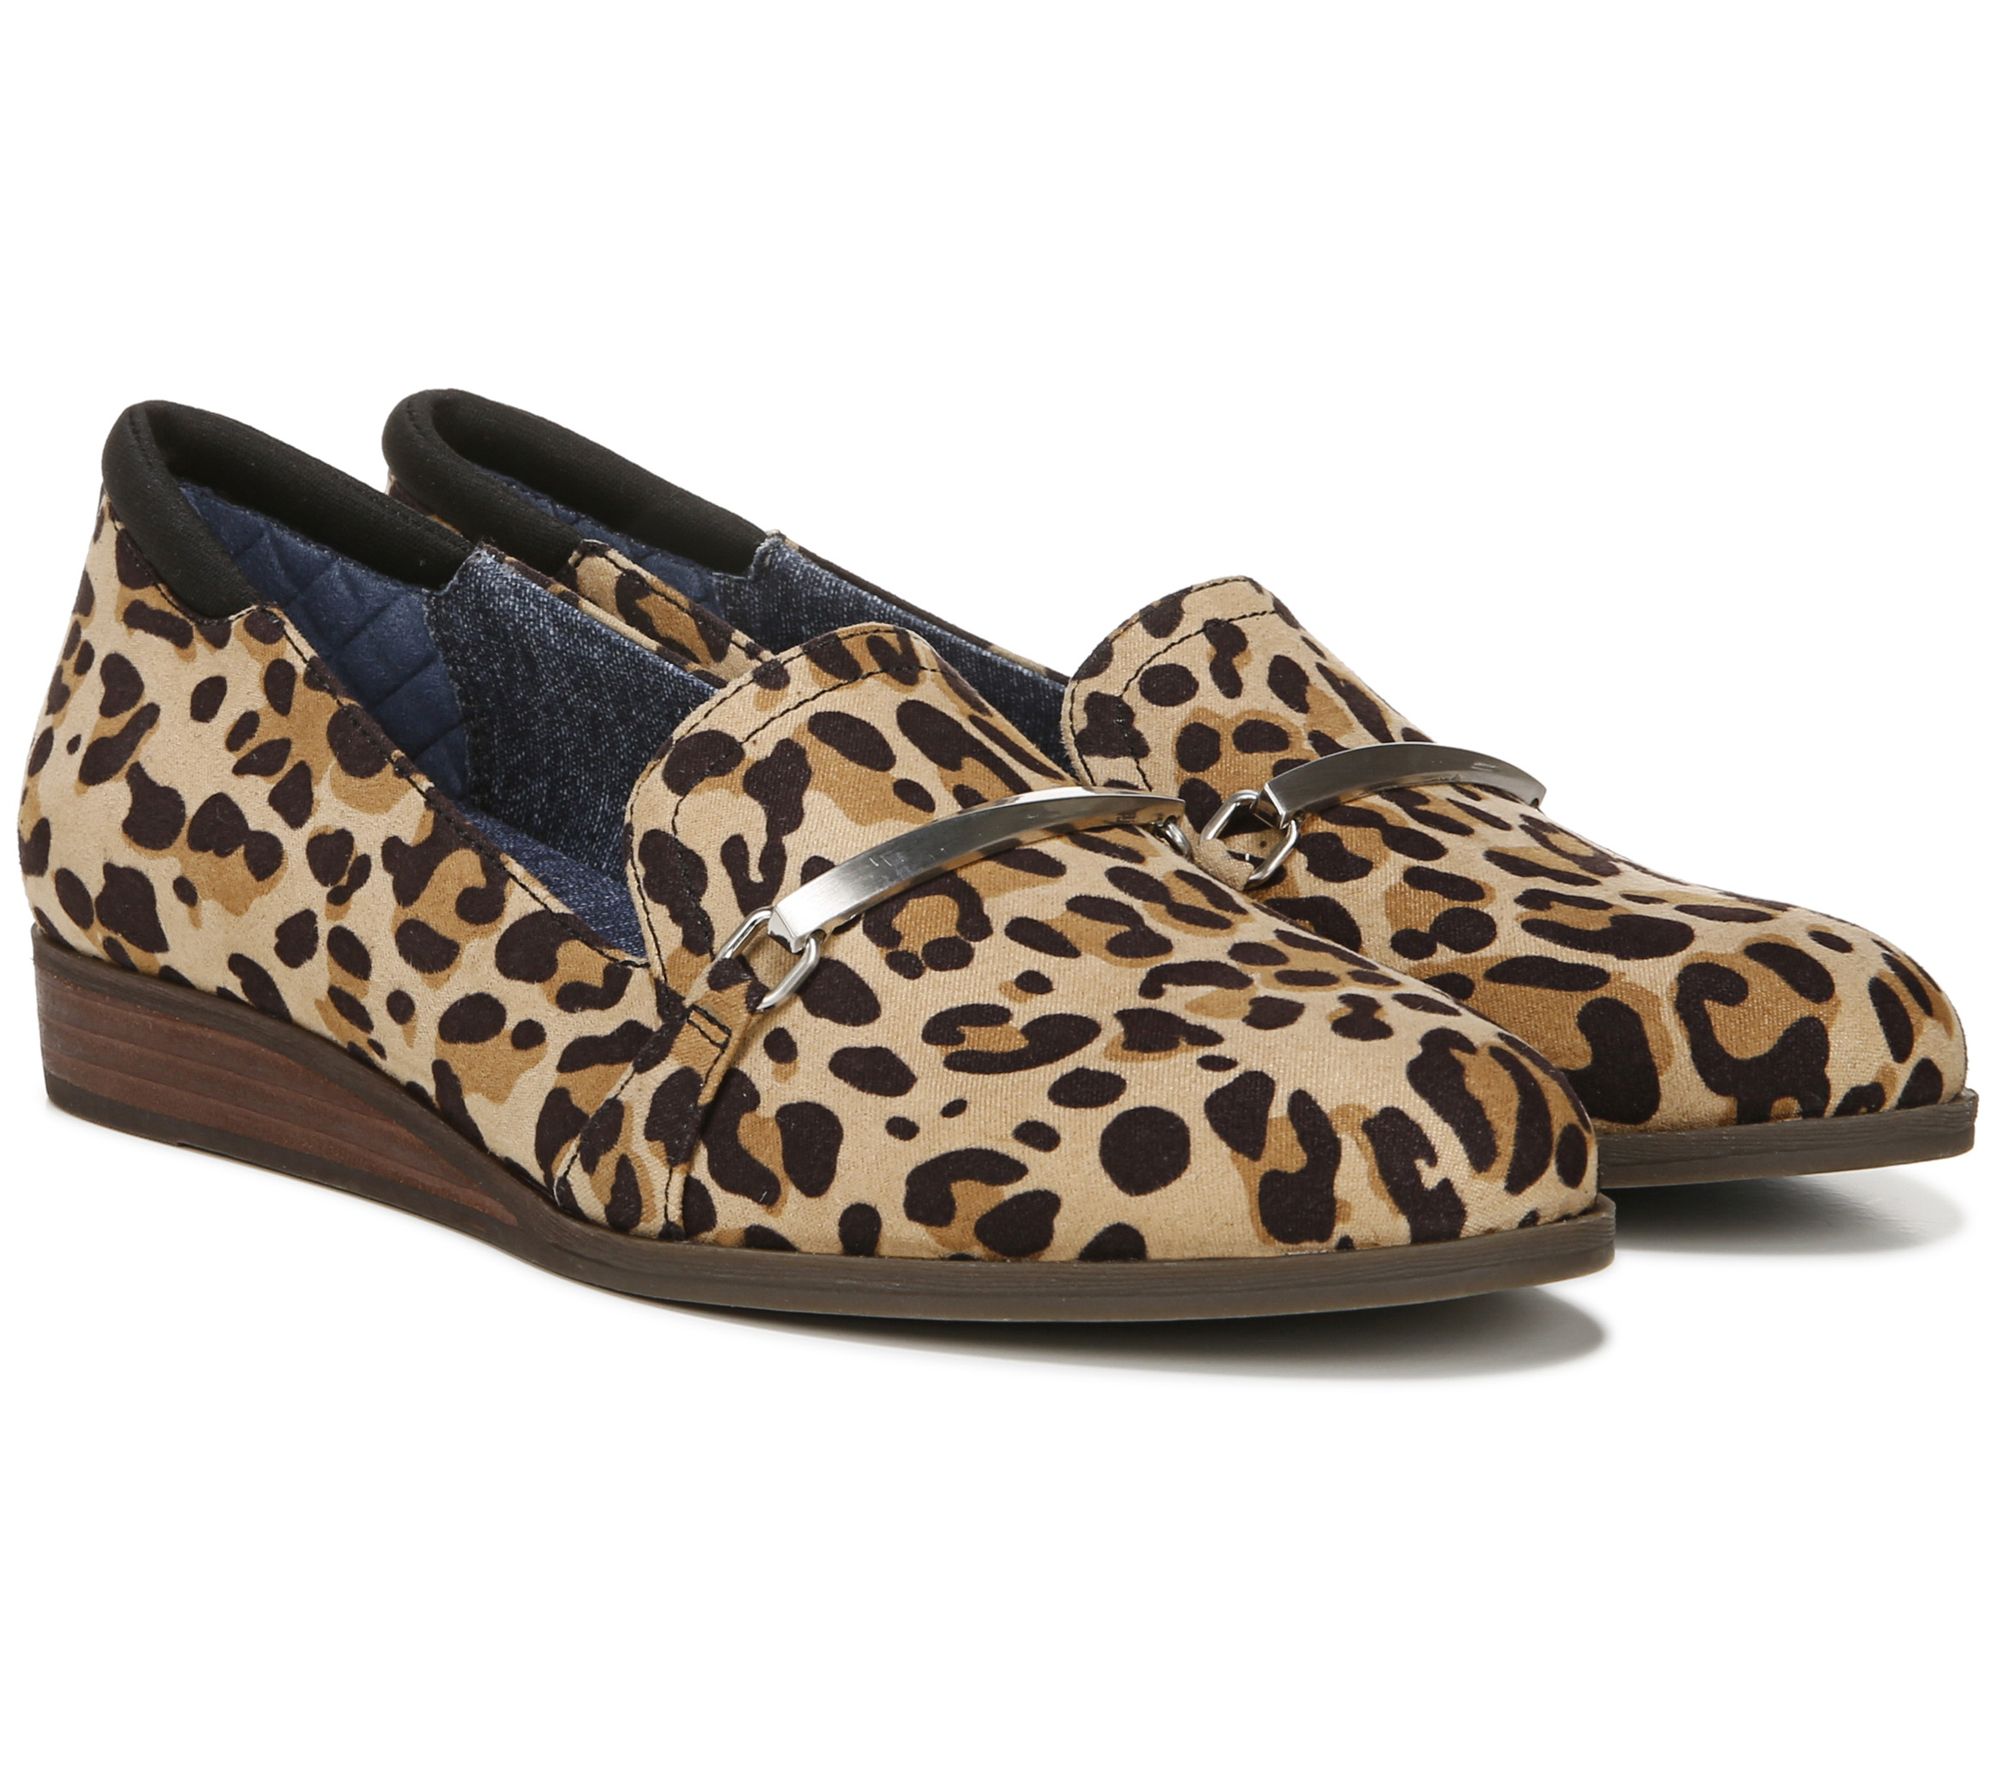 Dr. Scholl's Slip-On Wedge Loafers - Dezi - QVC.com